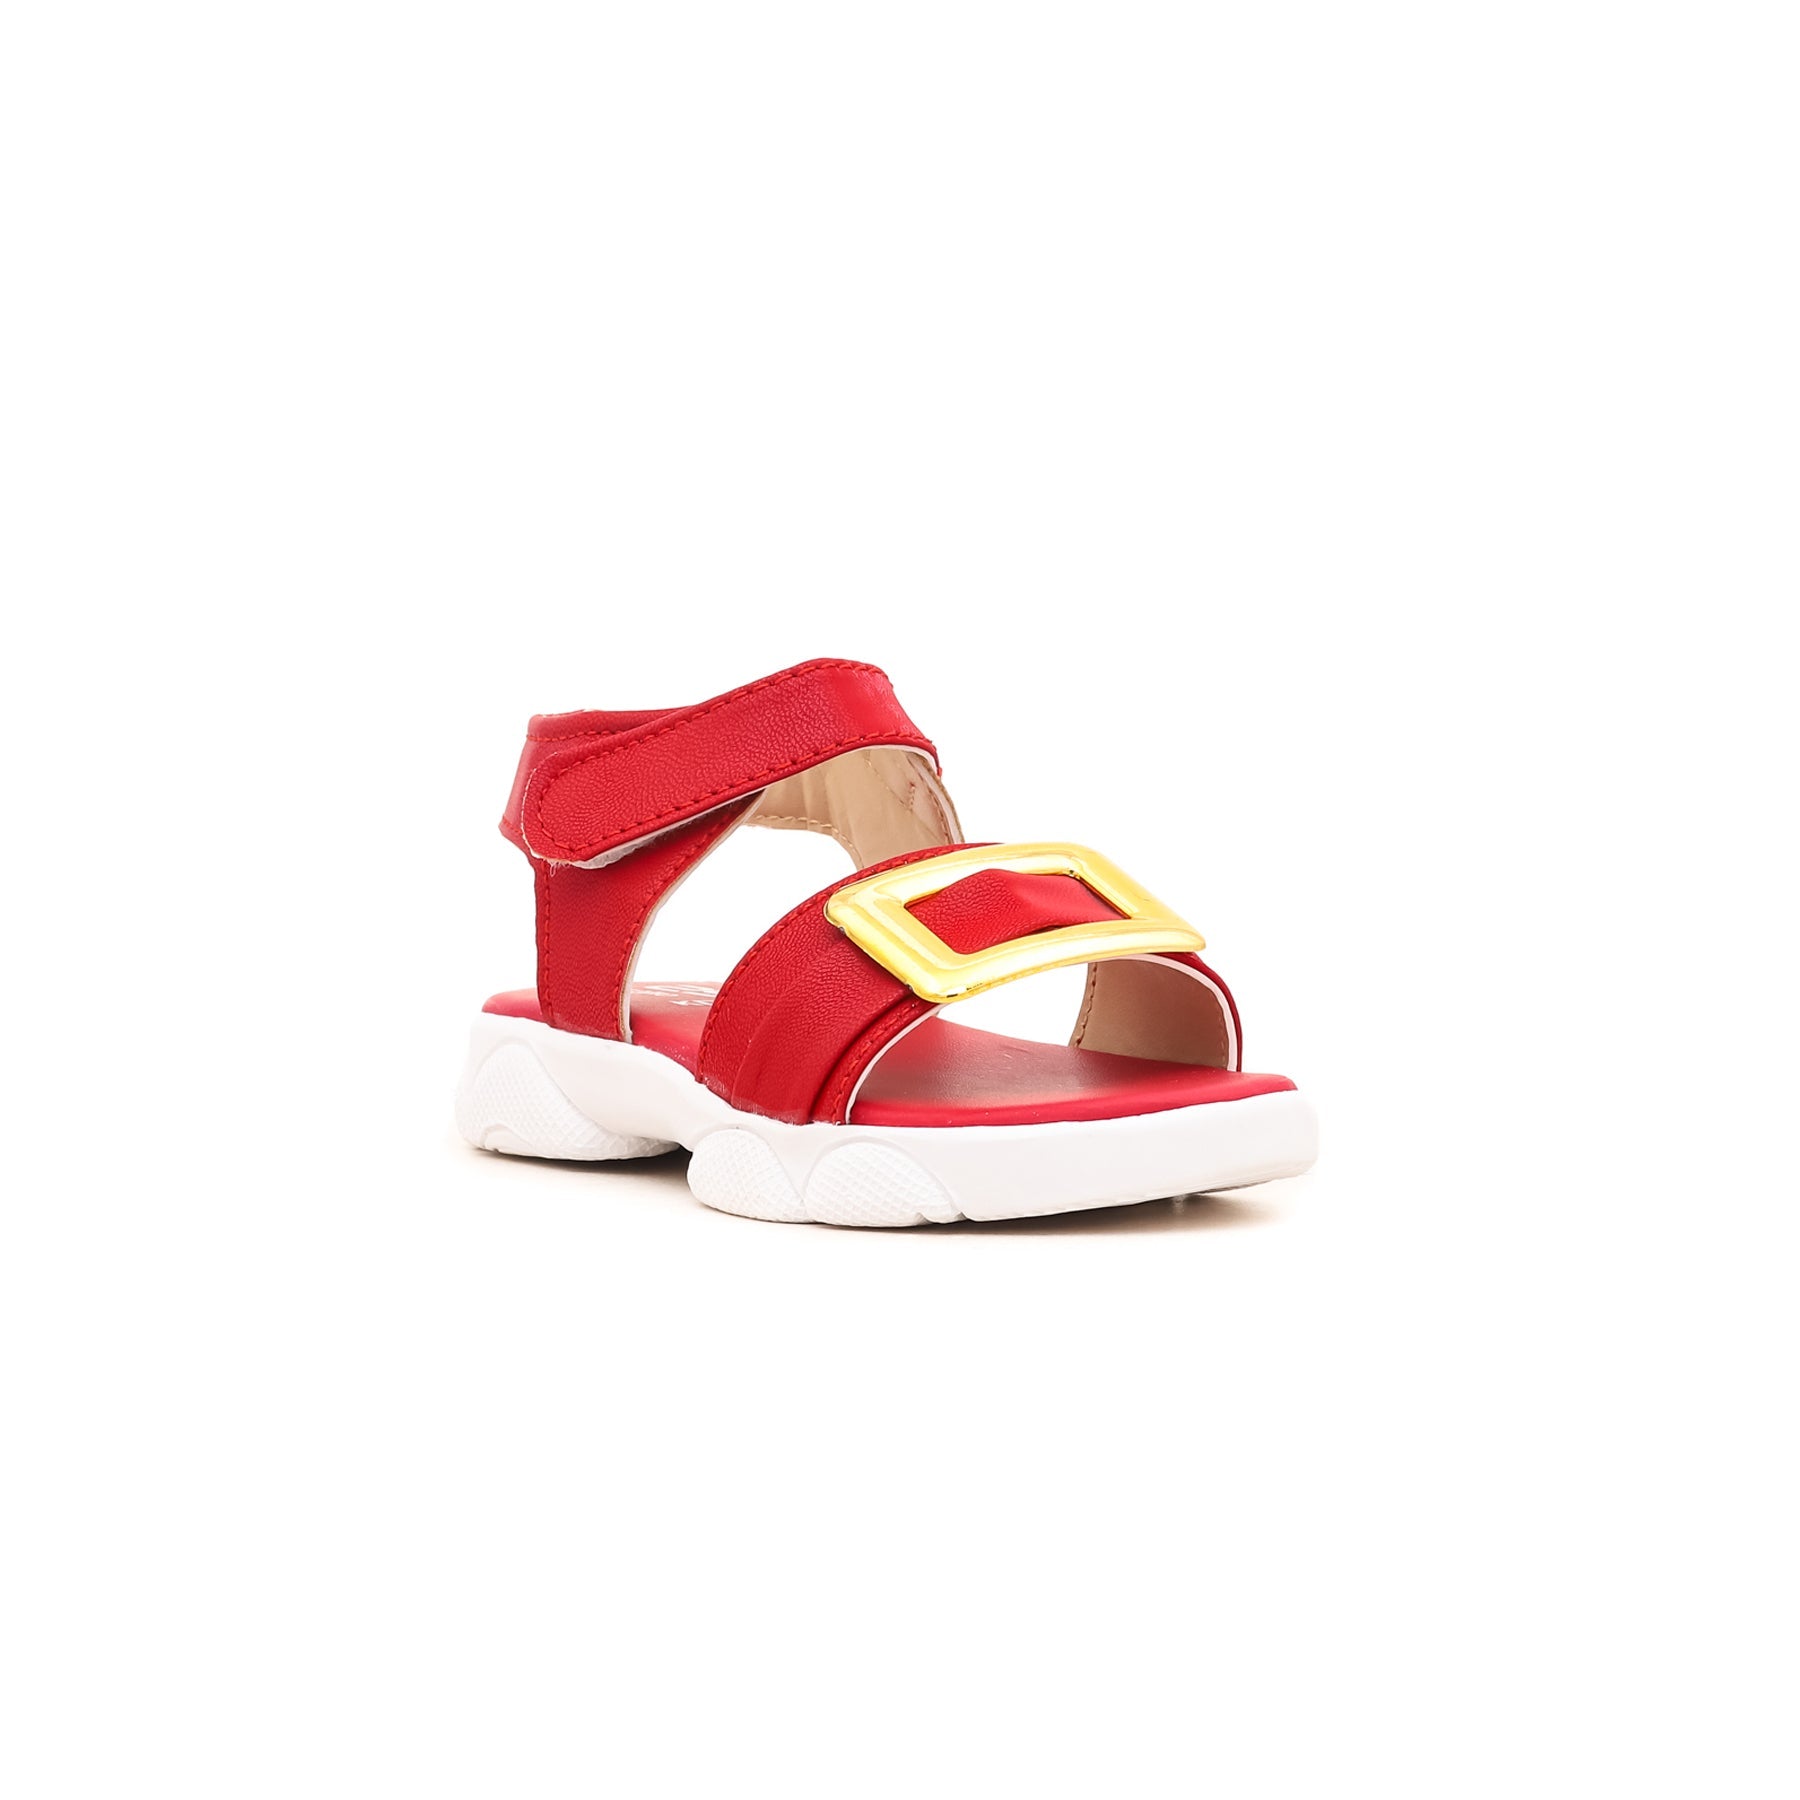 Girls Red Casual Sandal KD7411